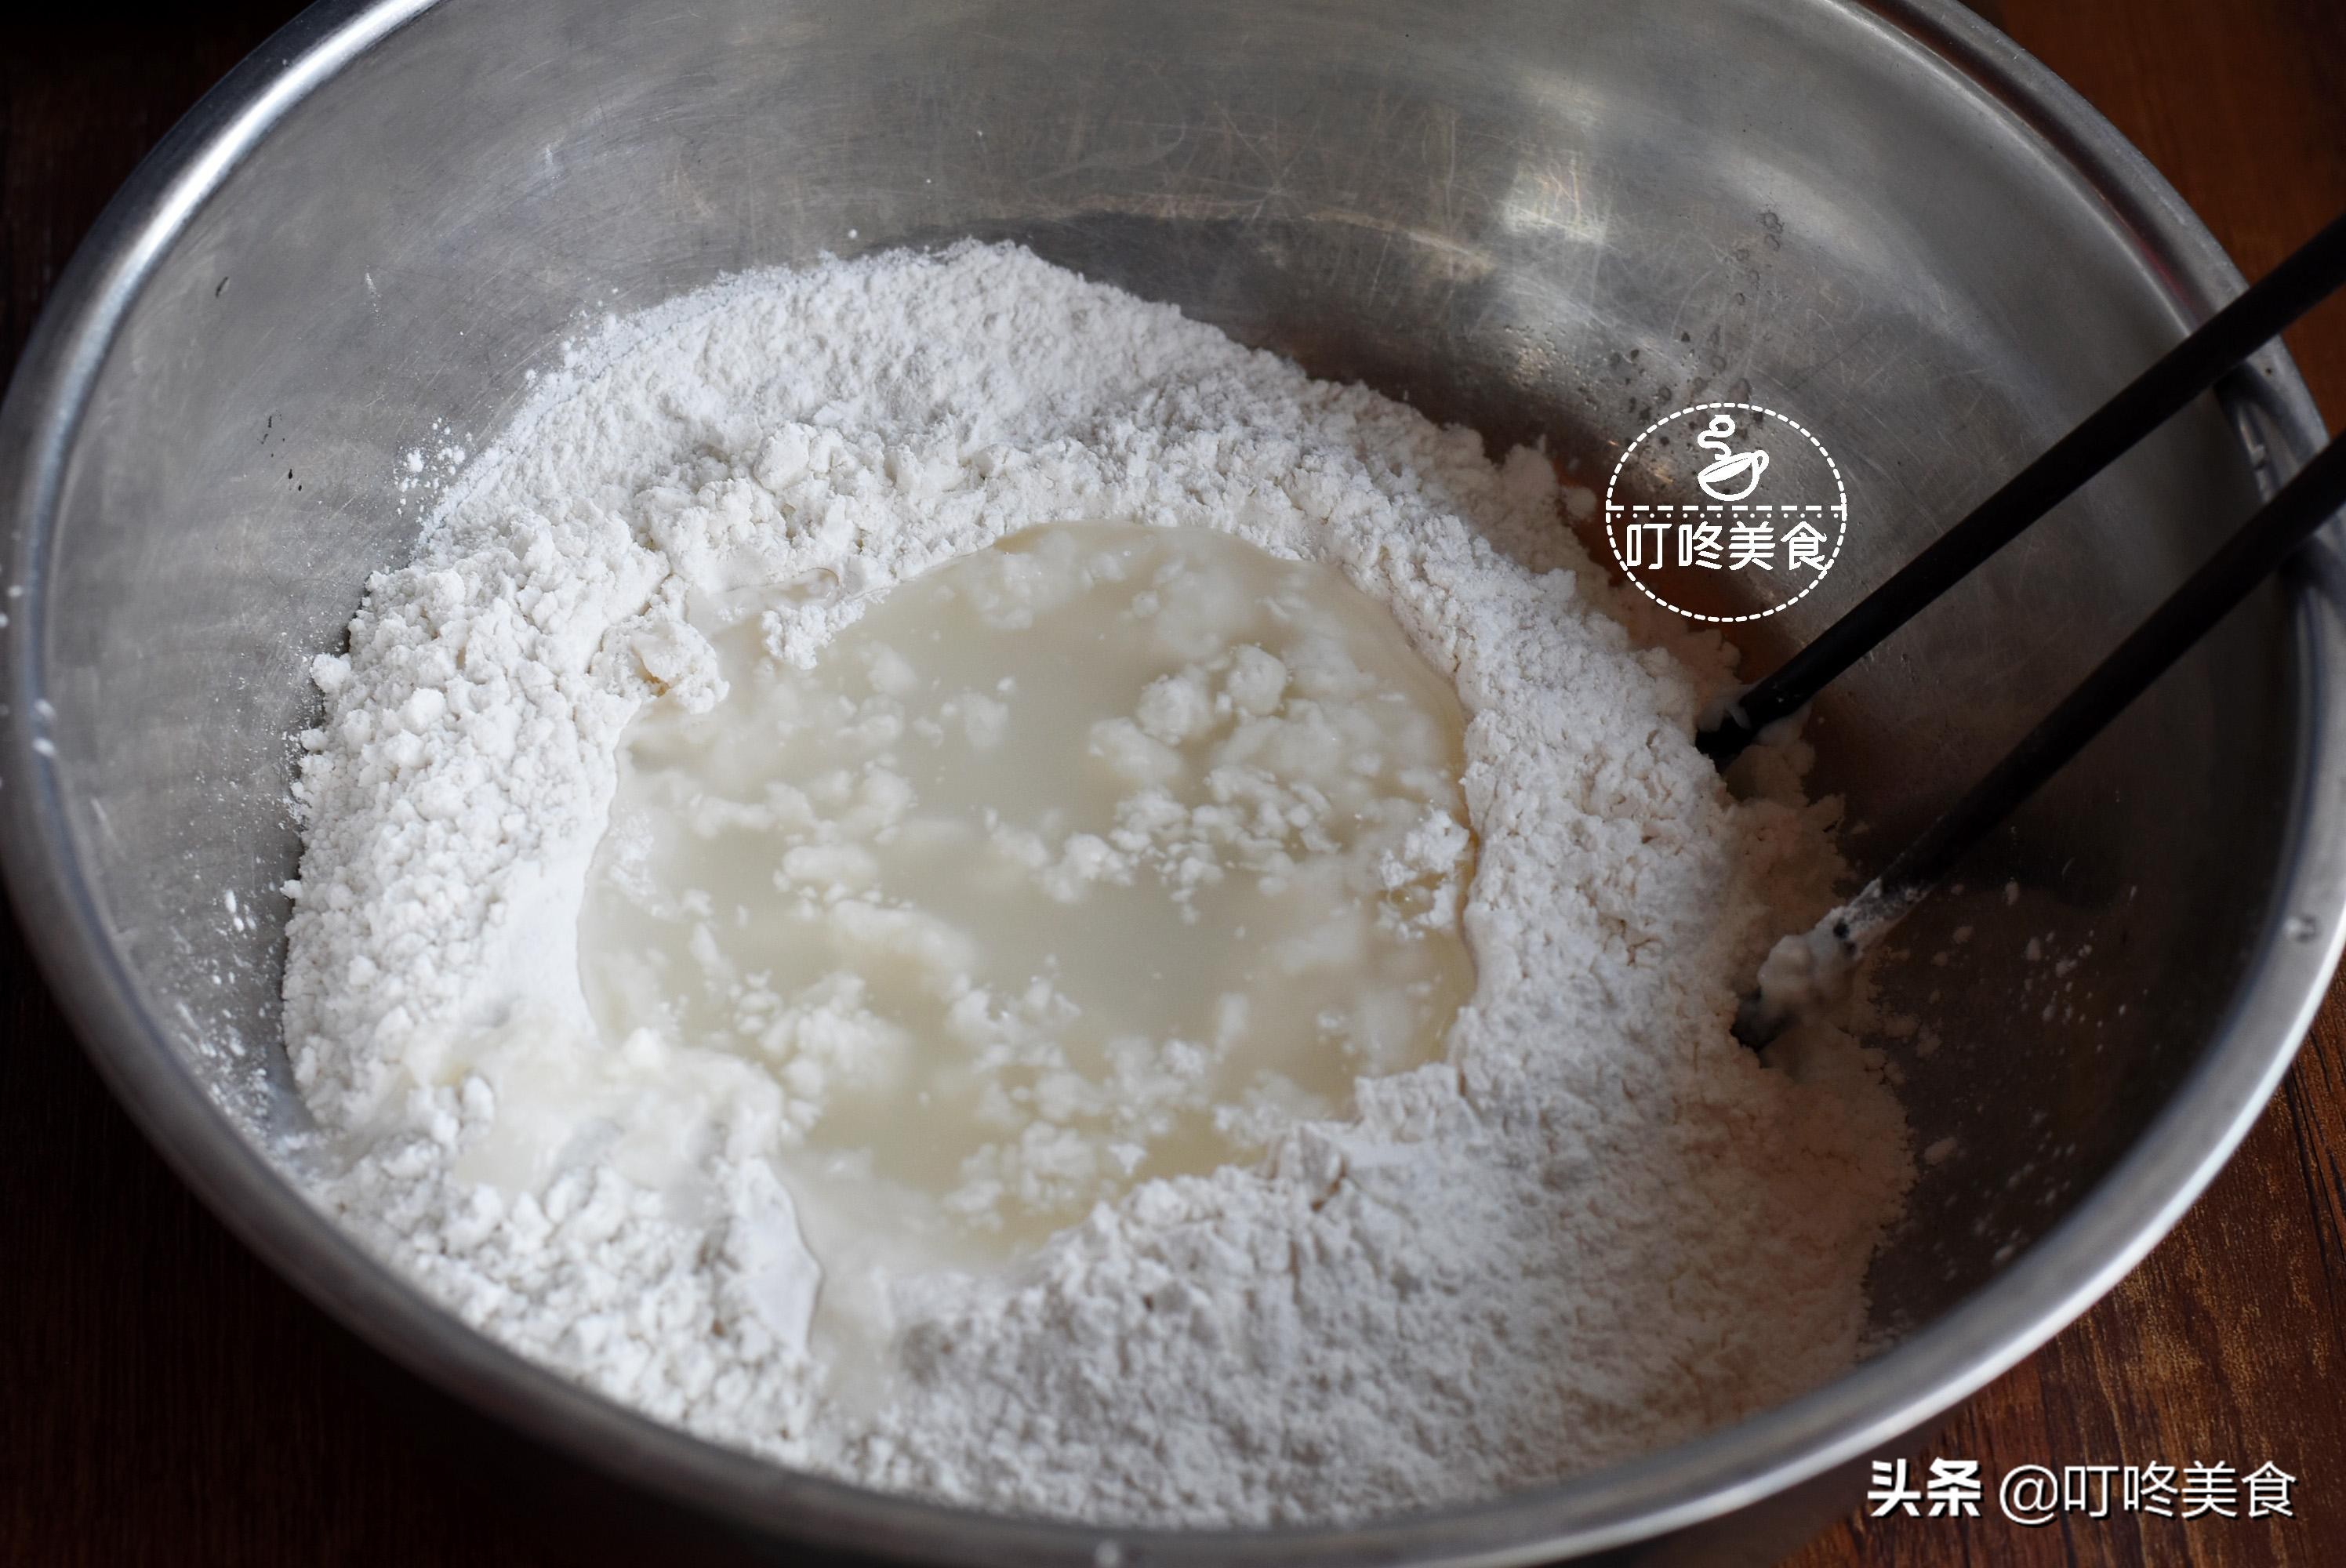 Pink of 1 bowl of polished glutinous rice a brown sugar, 2 minutes teach you to make brown sugar glutinous rice cake, sweet soft glutinous Q is played, exceed delicious